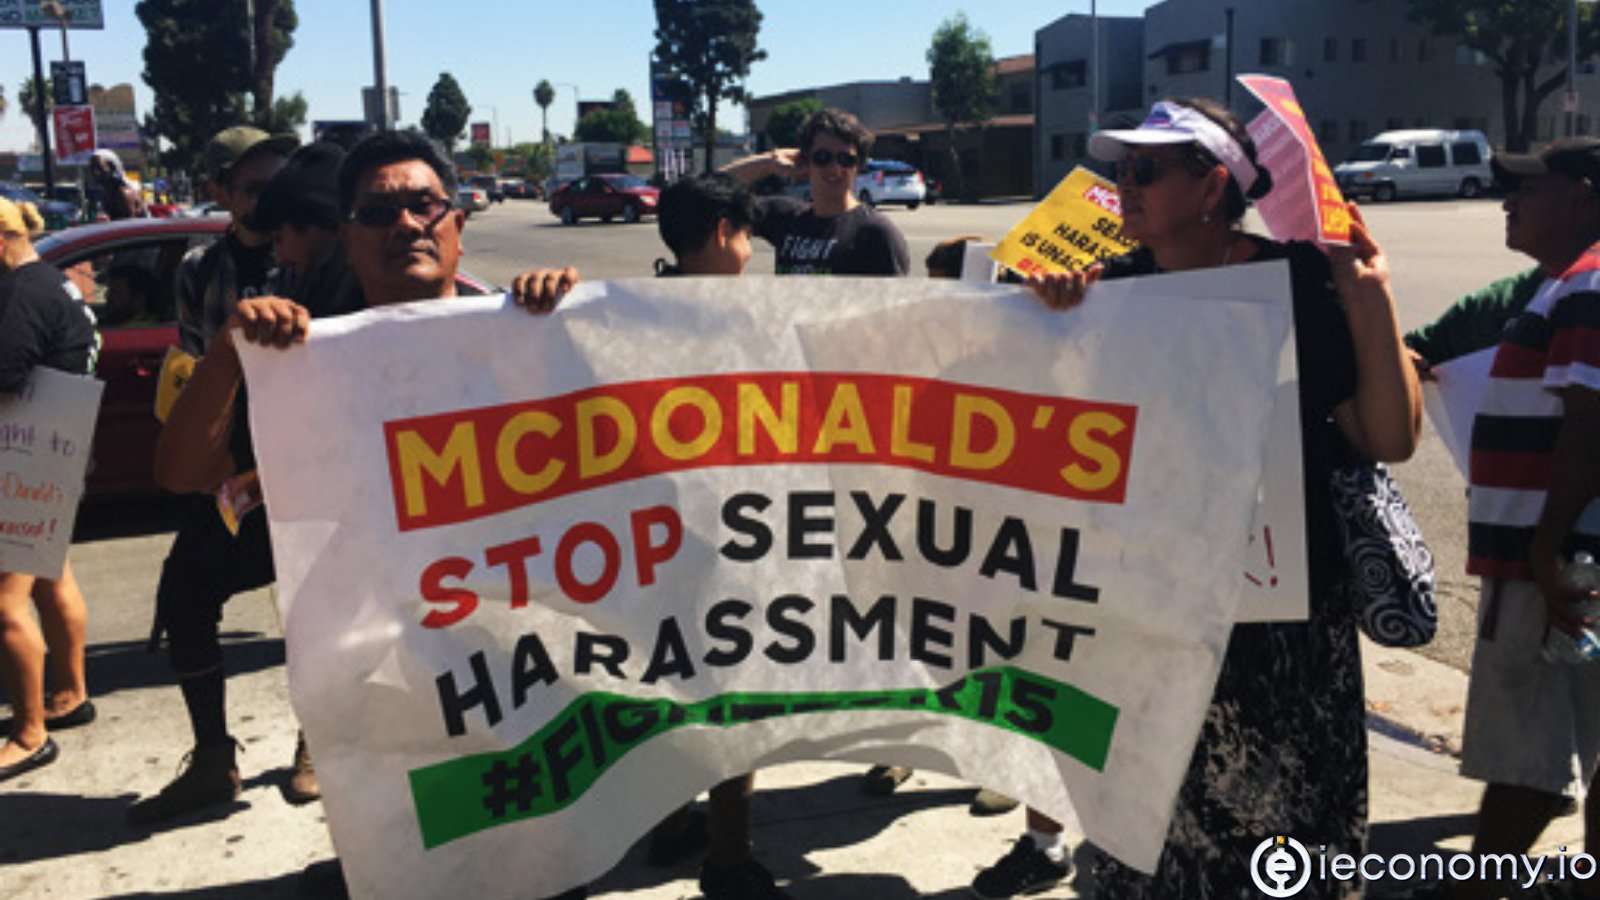 McDonald’s employees protested in sexual harassment in the USA